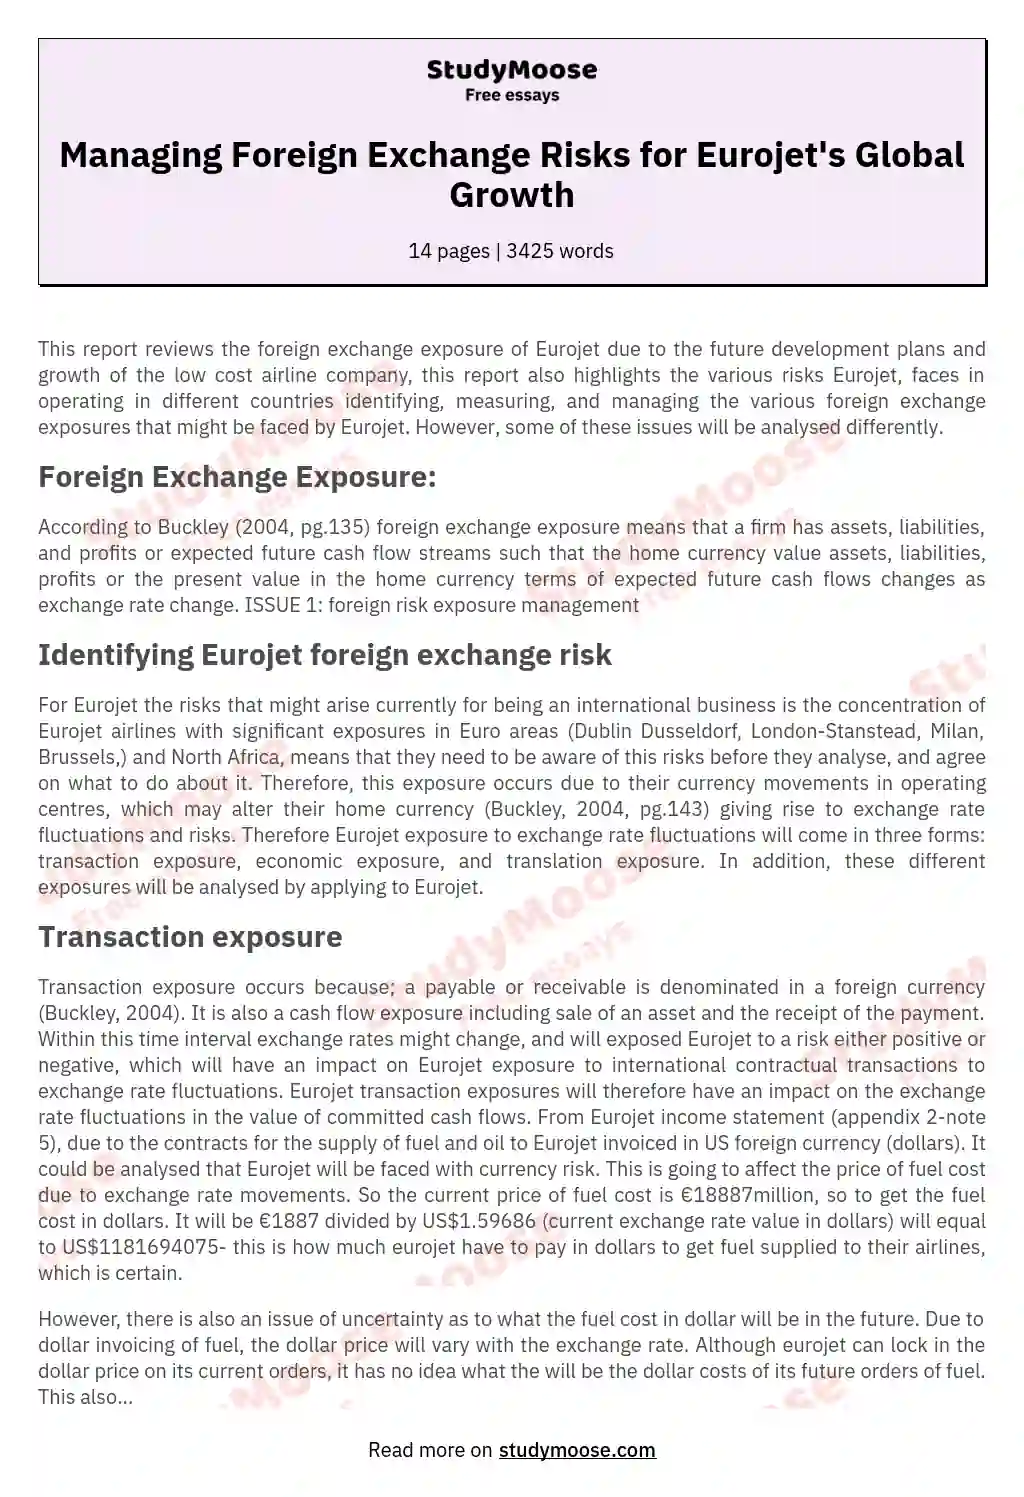 Managing Foreign Exchange Risks for Eurojet's Global Growth essay